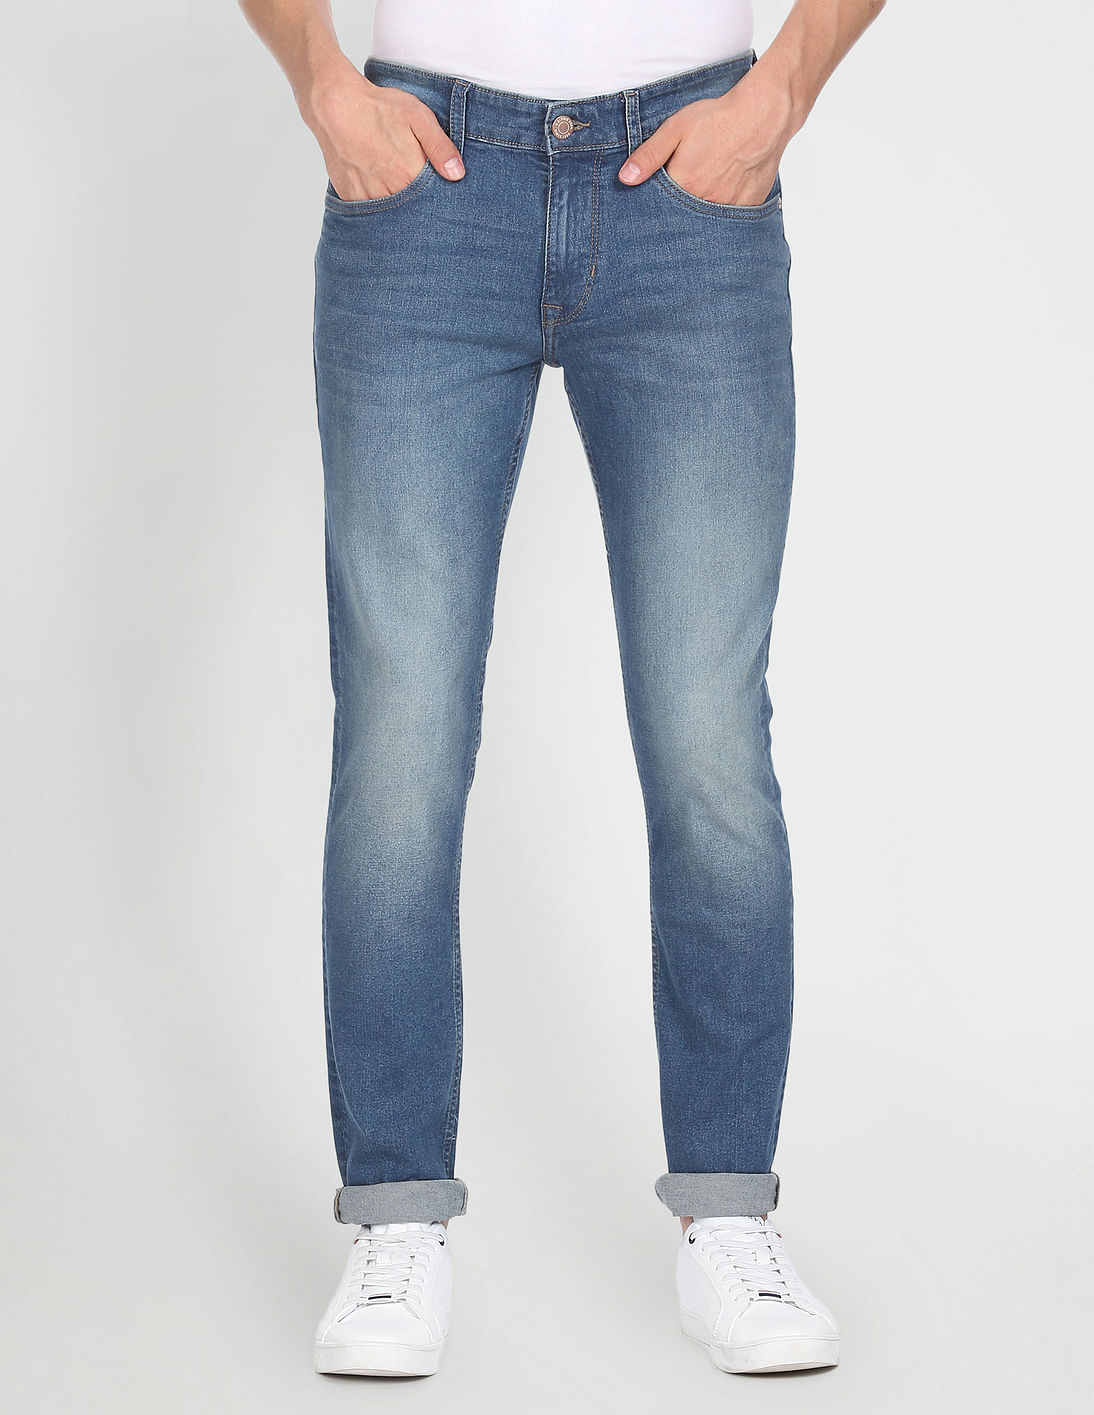 Regular Fit Faded Nordstrom Blue Jeans at Rs 849.5/piece in Ulhasnagar